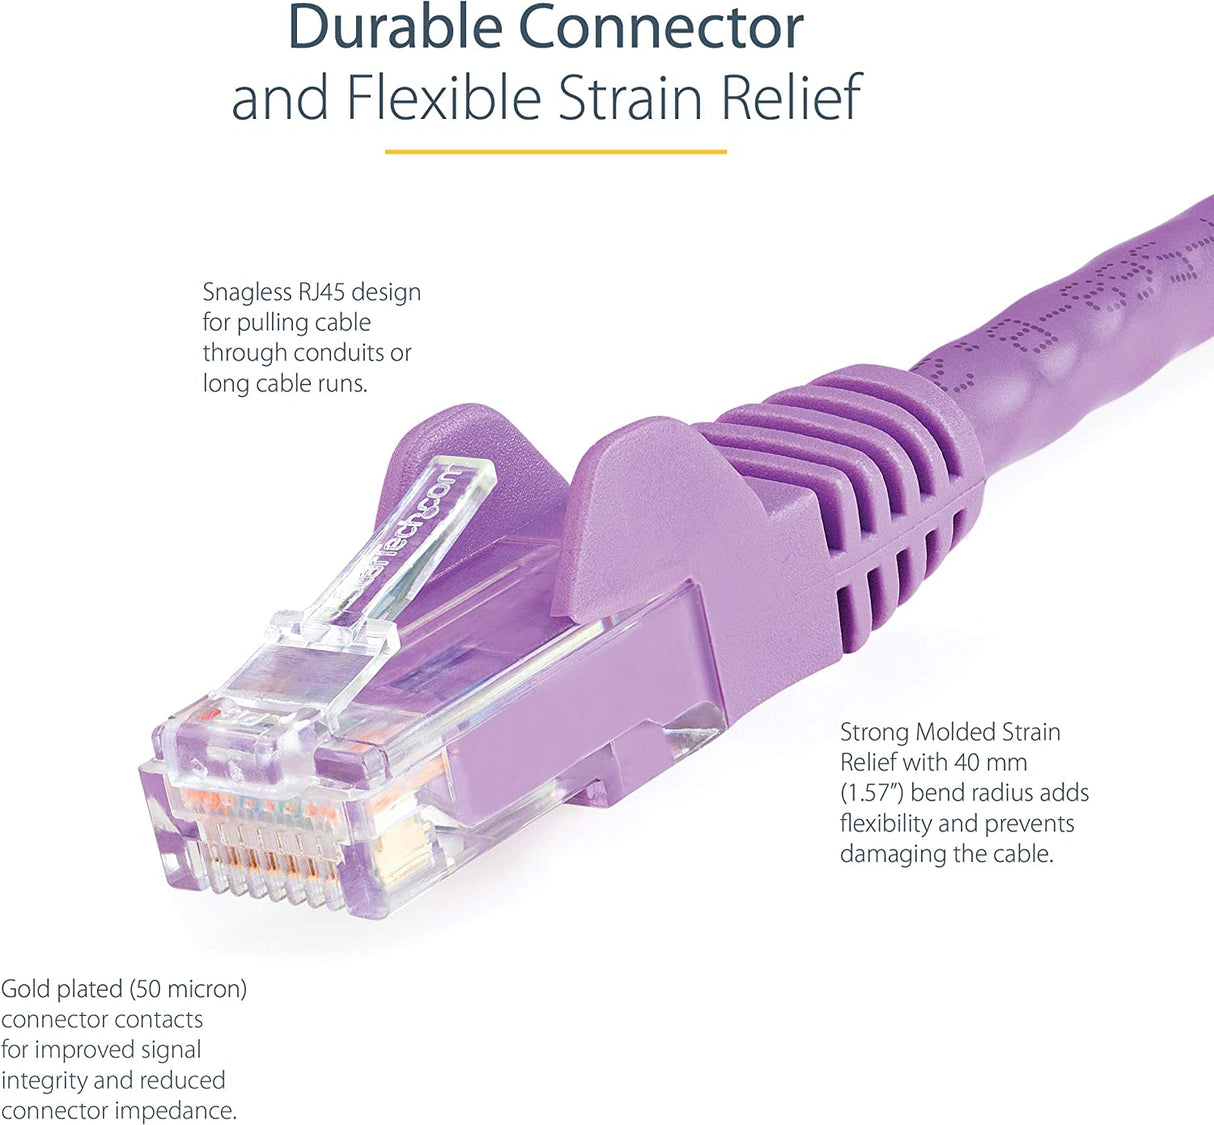 StarTech.com 10ft CAT6 Ethernet Cable - Purple CAT 6 Gigabit Ethernet Wire -650MHz 100W PoE++ RJ45 UTP Category 6 Network/Patch Cord Snagless w/Strain Relief Fluke Tested UL/TIA Certified (N6PATCH10PL) Purple 10 ft / 3m 1 Pack